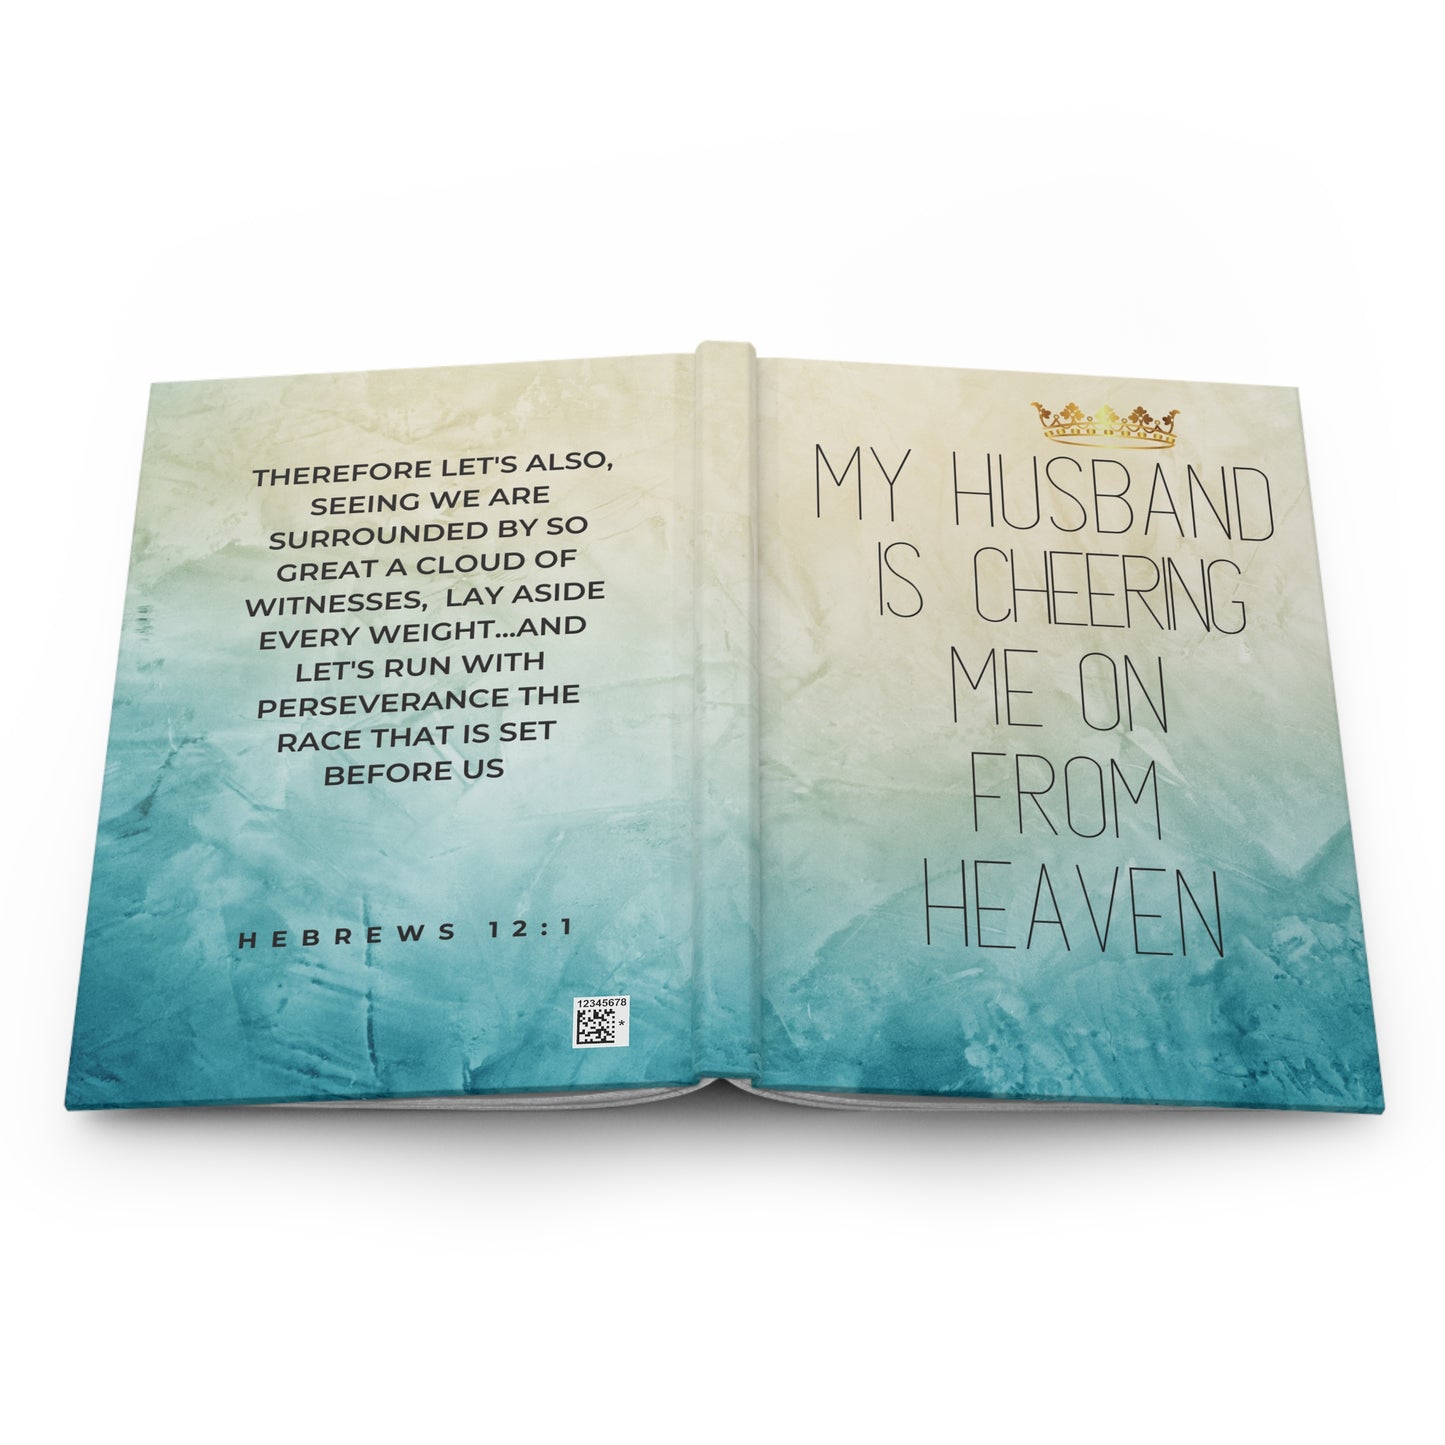 Grief Journal for Loss of Husband, Cheering Me On From Heaven